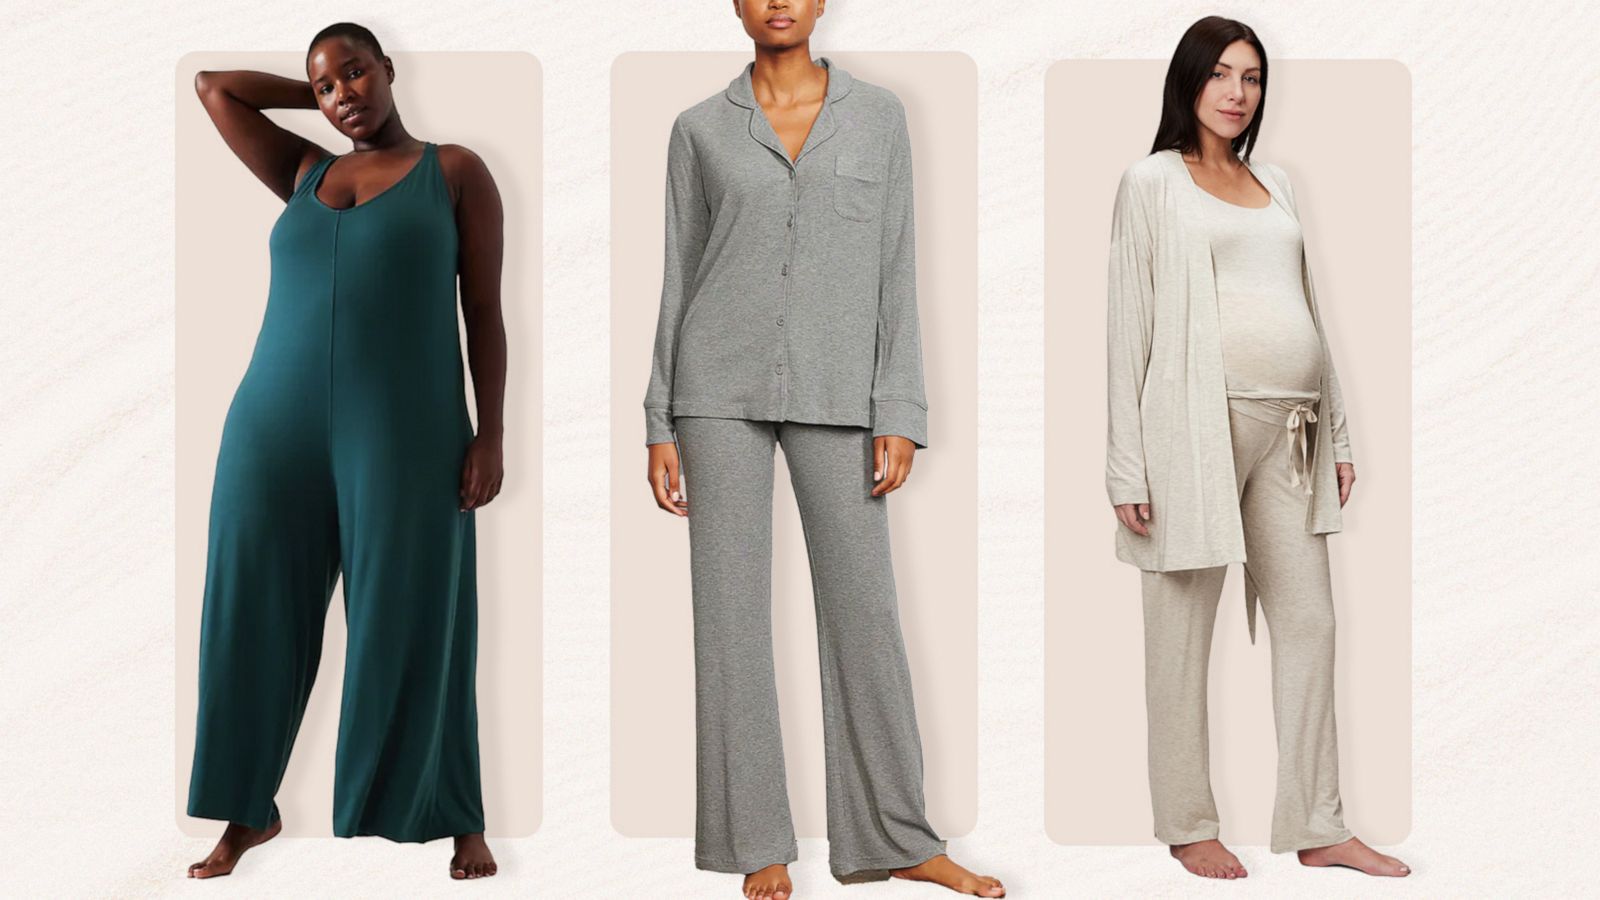 Postpartum fashion finds you'll love wearing and lounging in